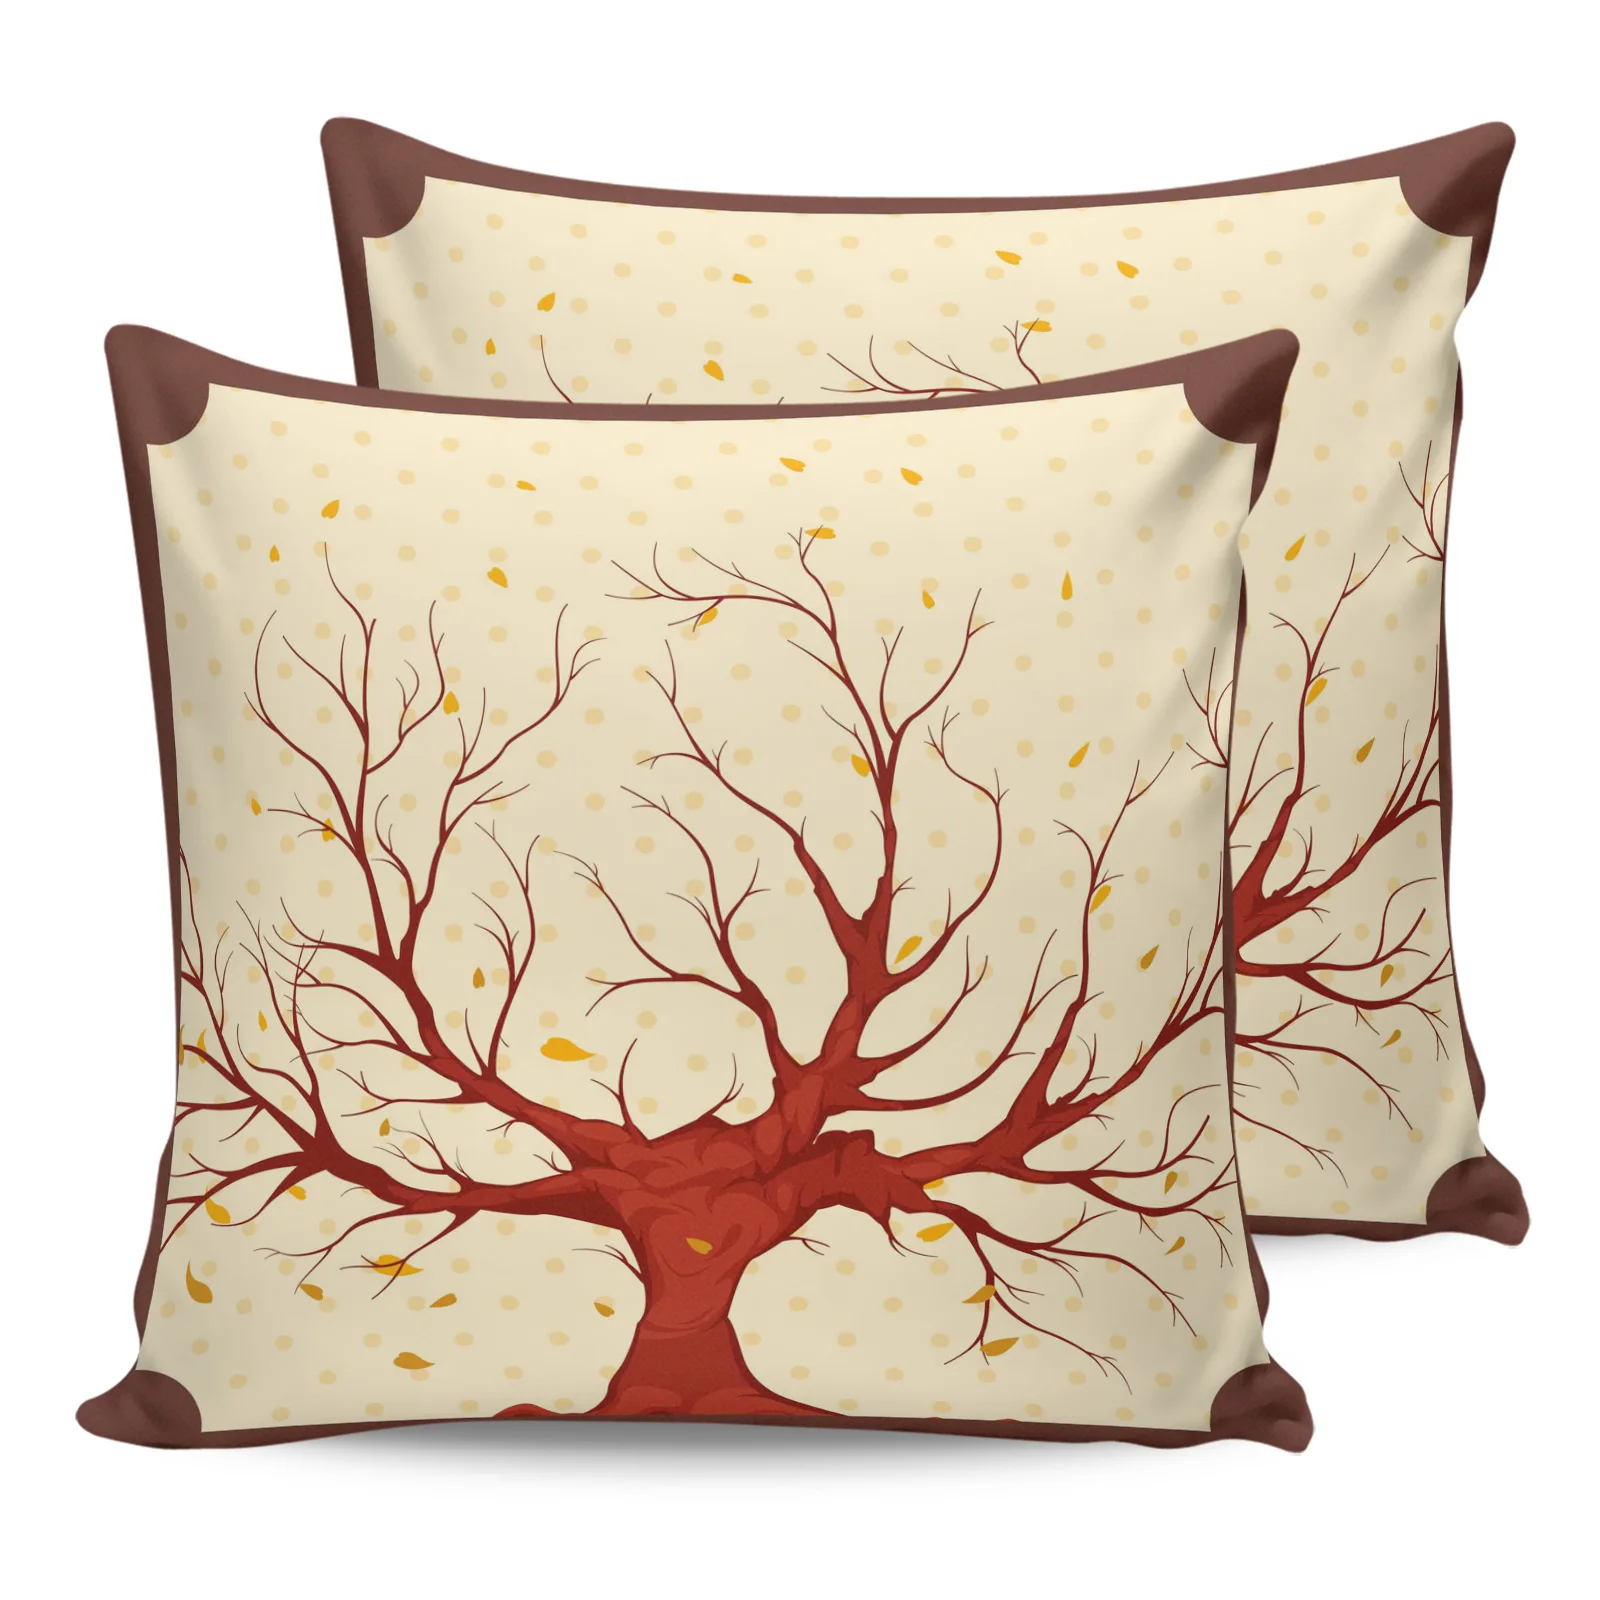 

Tree Fallen Leaves Wave Point Pillow Case Home Sofa Decor Cushion Cover for Living Room Two Piece Set Decorative Pillowcases